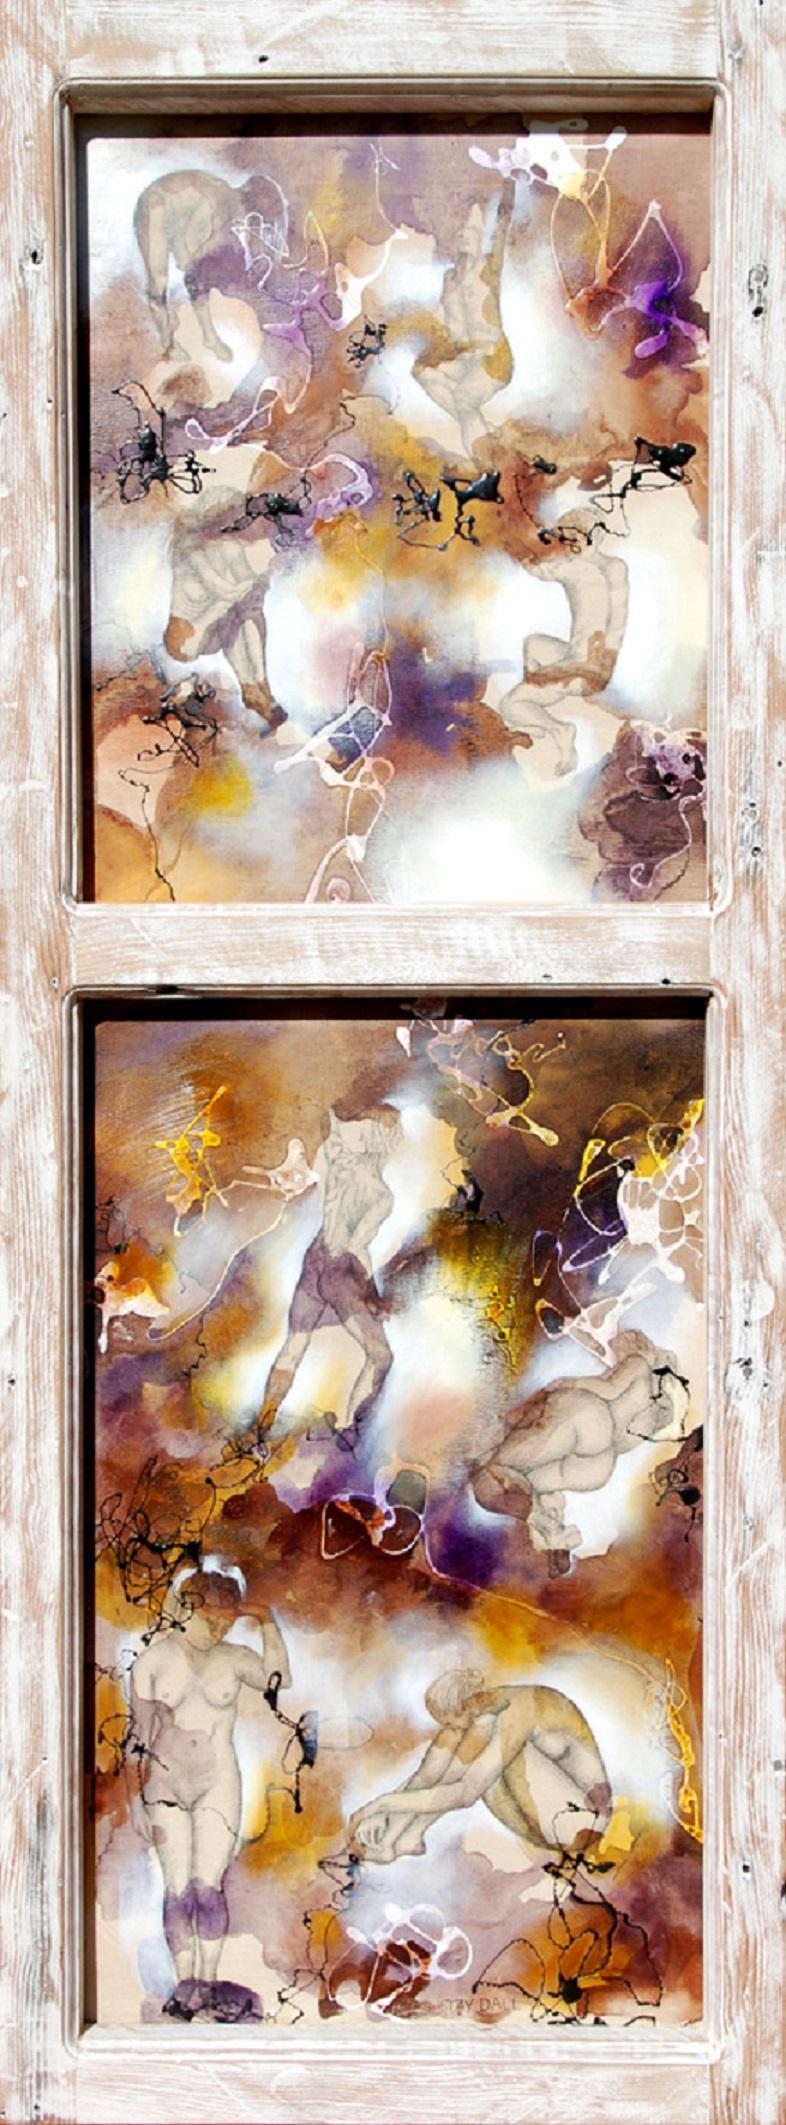 Surreal Nude Oil Painting with Wooden Frame "New Man Alone 1"